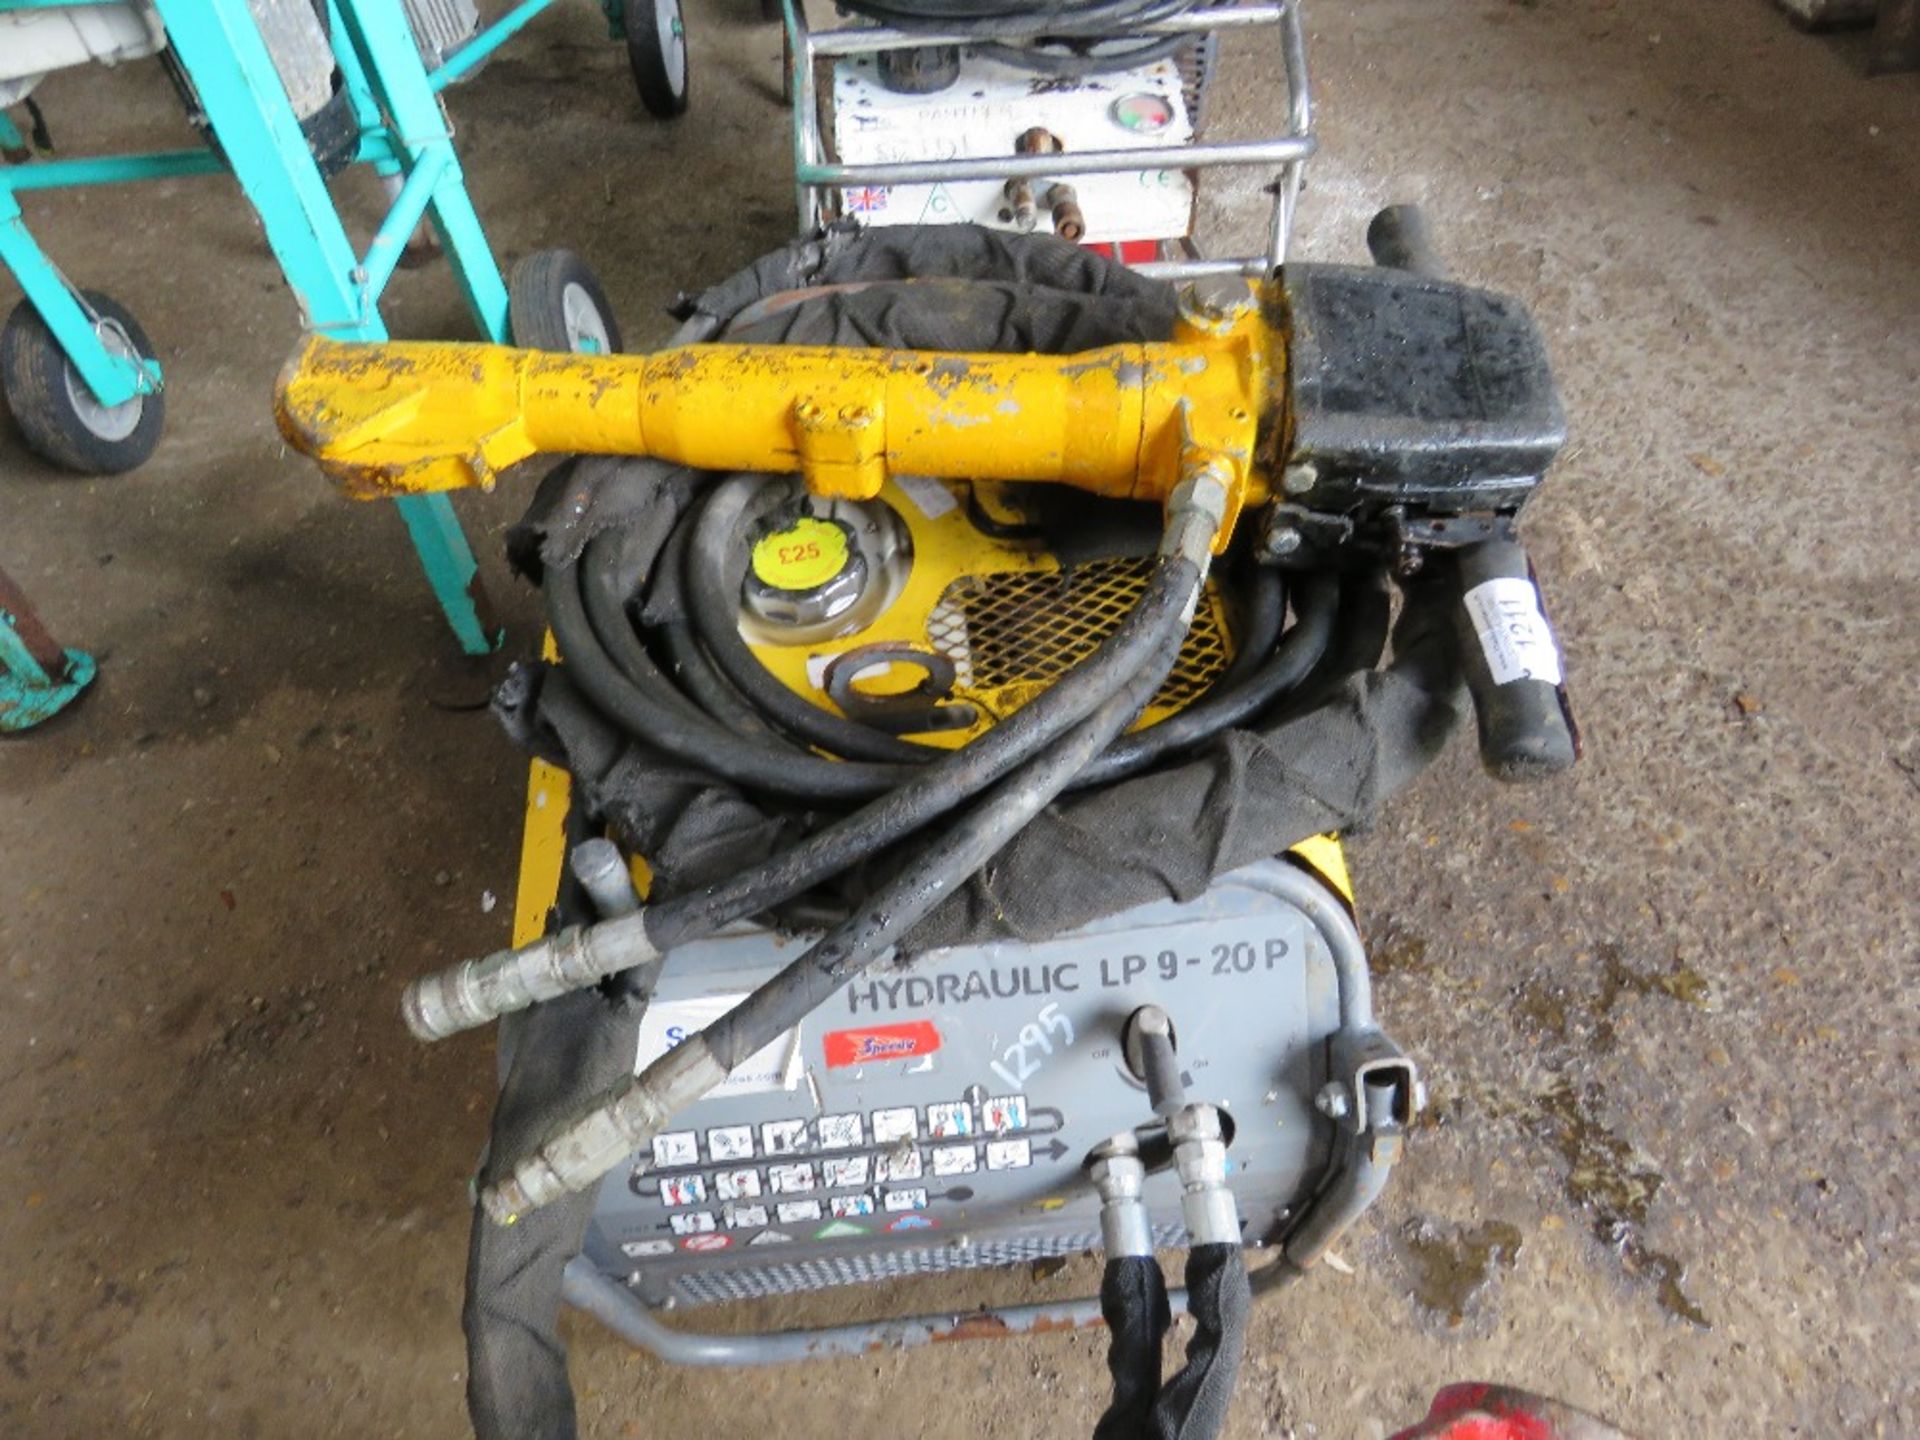 ATLAS COPCO LP9-20P HYDRAULIC BREAKER PACK COMPLETE WITH HOSE AND GUN - Image 2 of 3